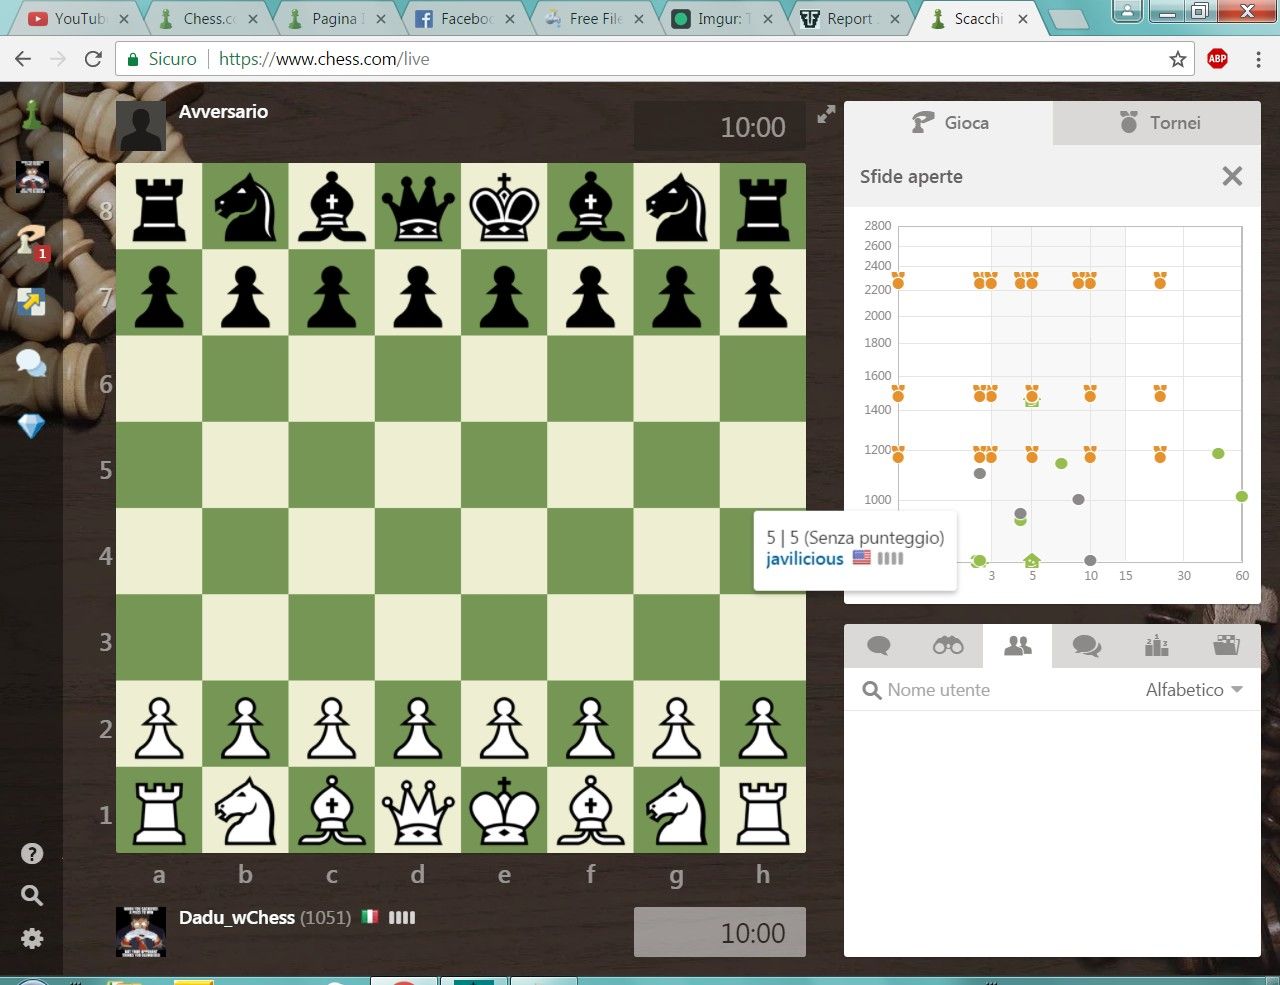 Is there any chance that a 1300 rated player can beat a 1400 rated player?  - Chess Forums 